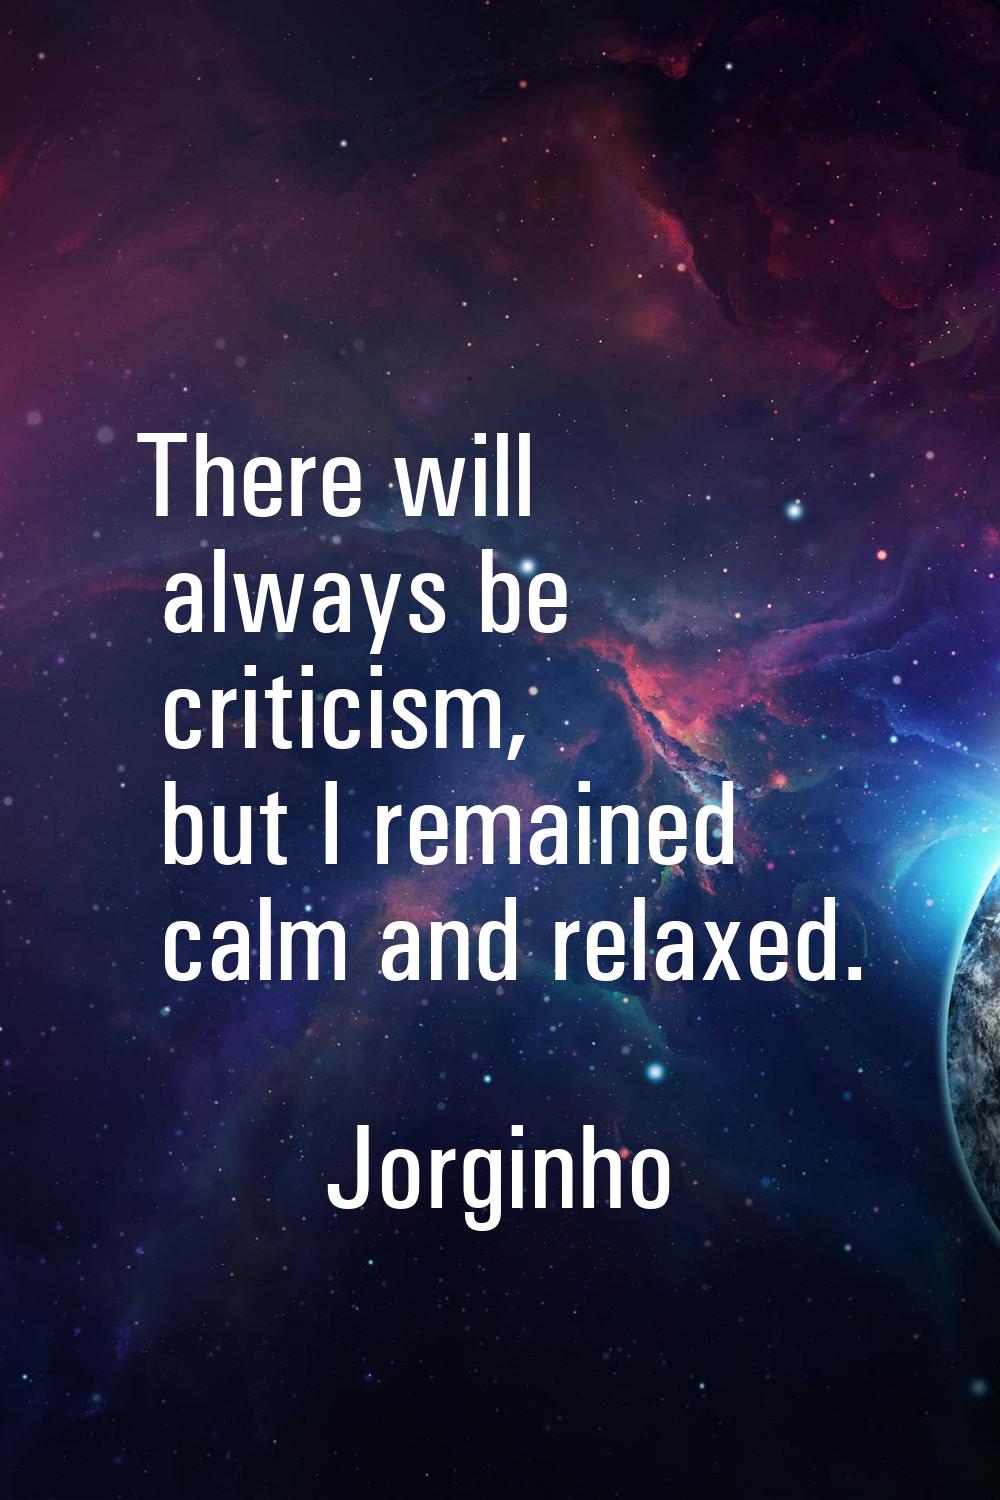 There will always be criticism, but I remained calm and relaxed.